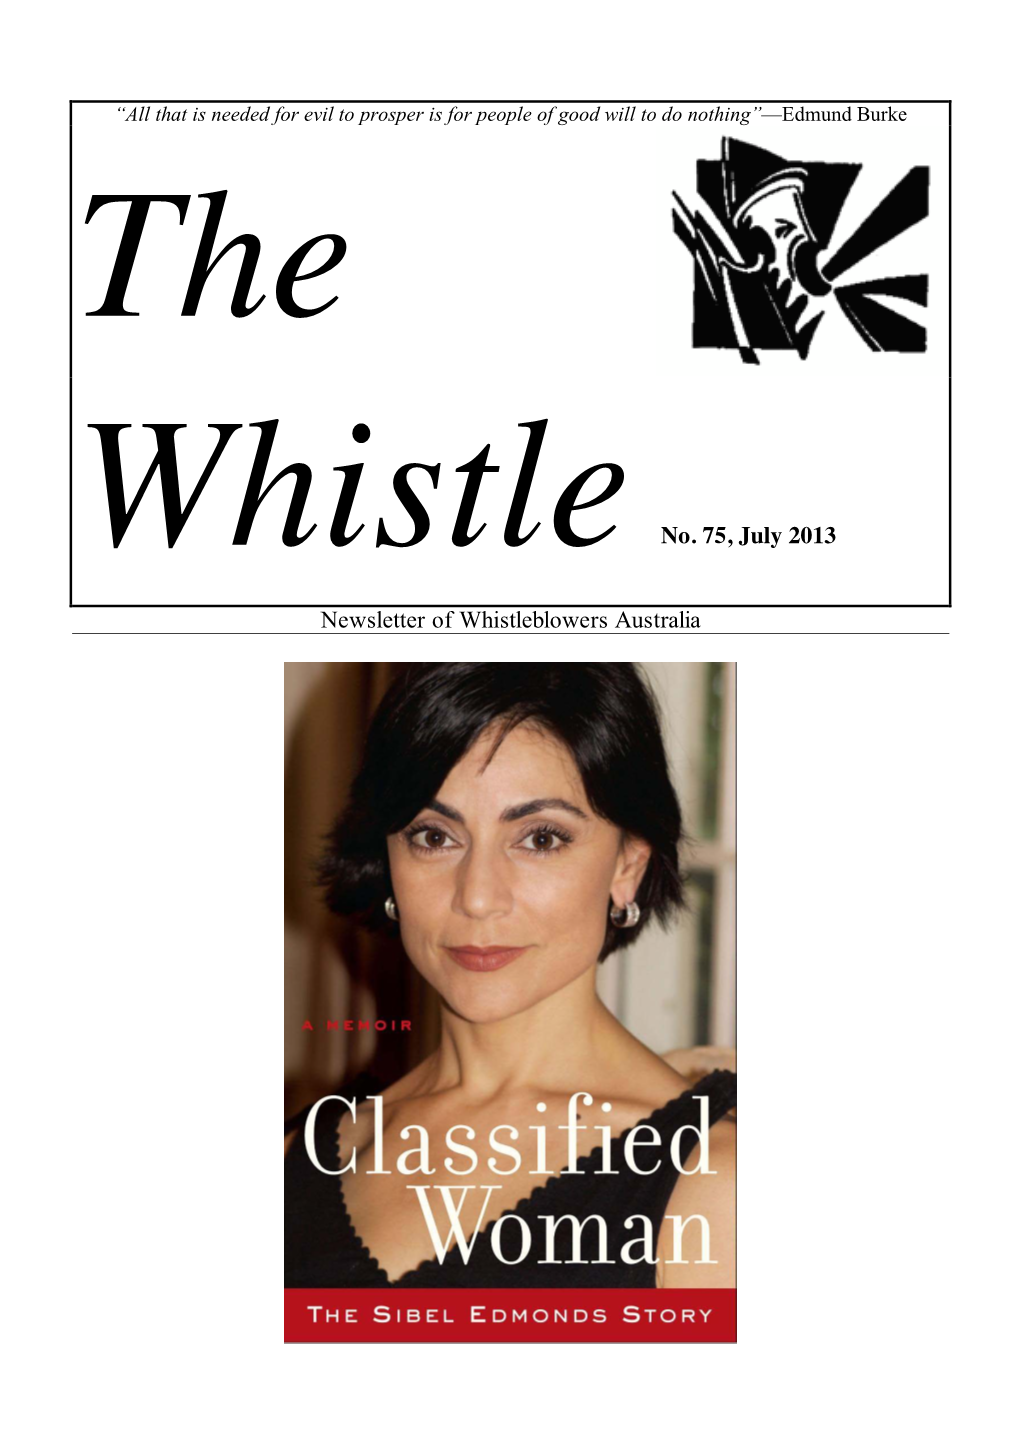 The Whistle, July 2013